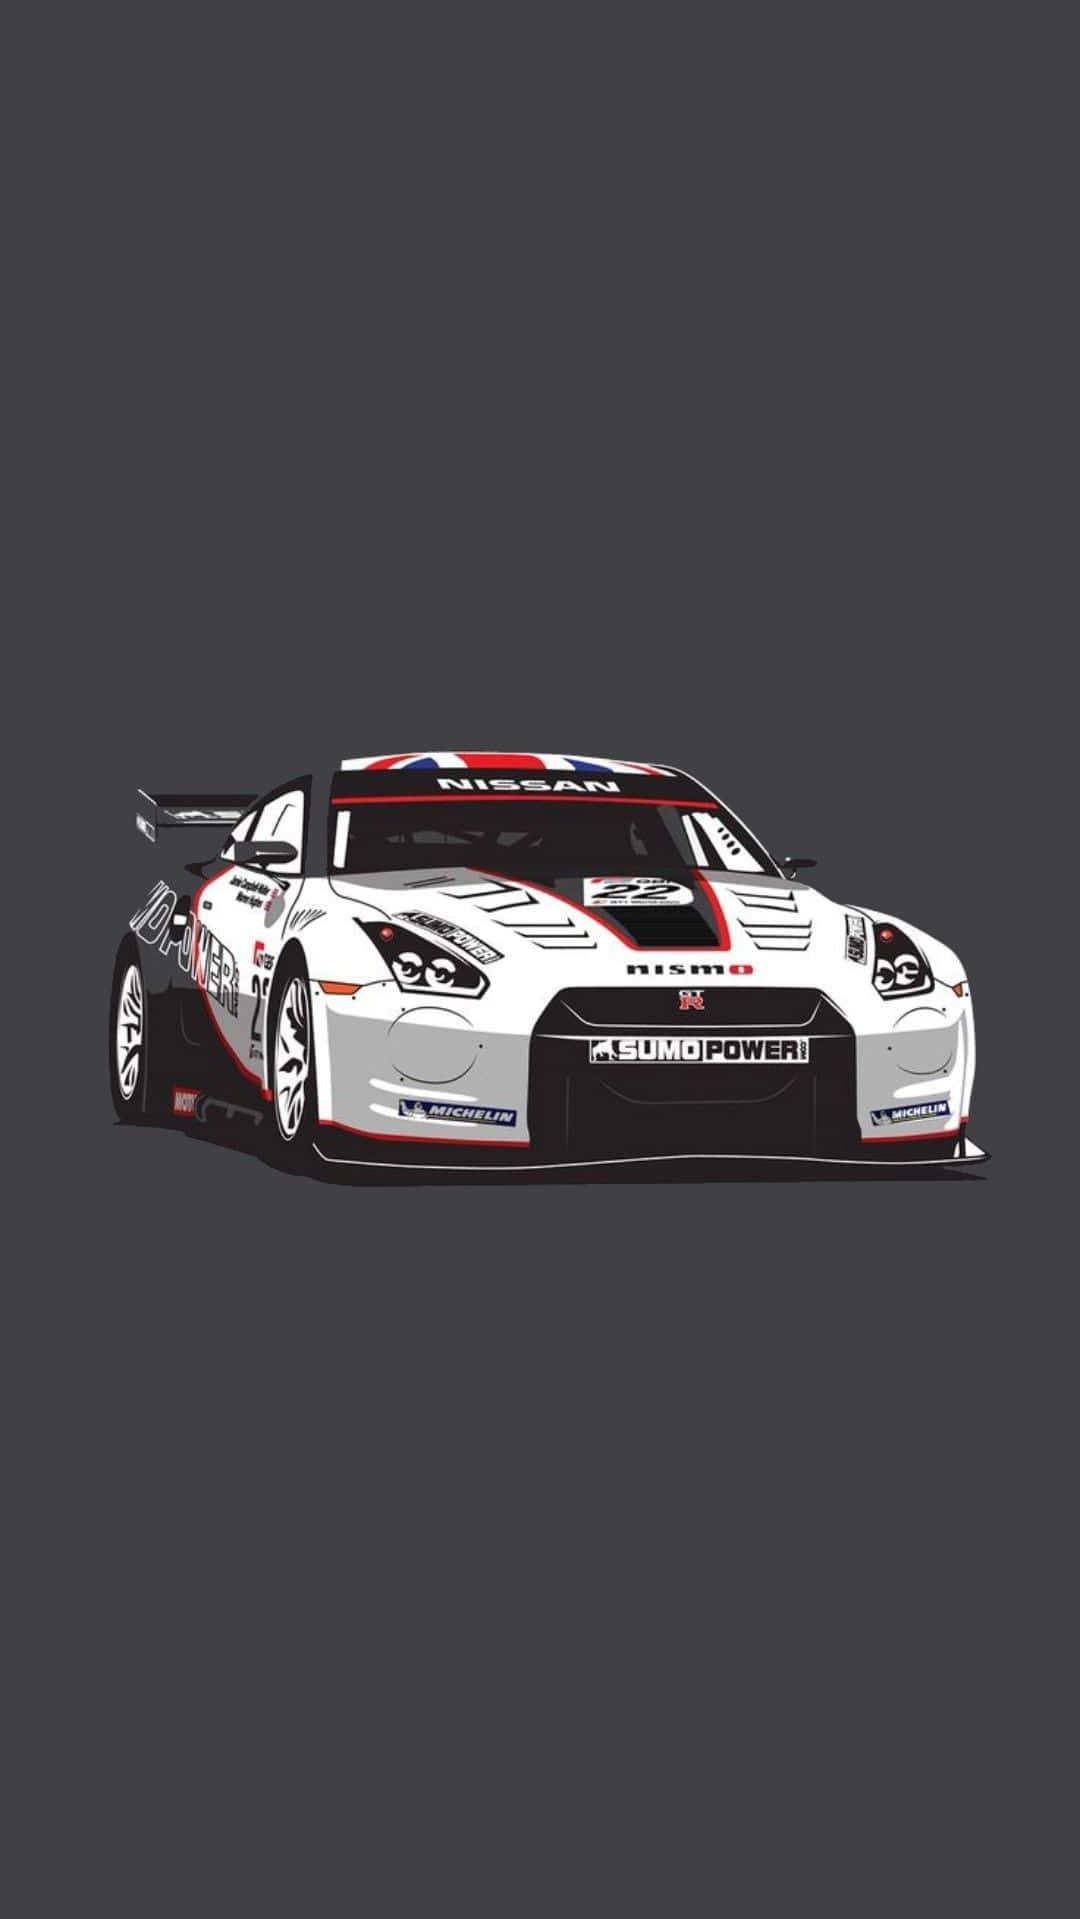 Enjoy the Power of Innovation with the Gtr iPhone Wallpaper